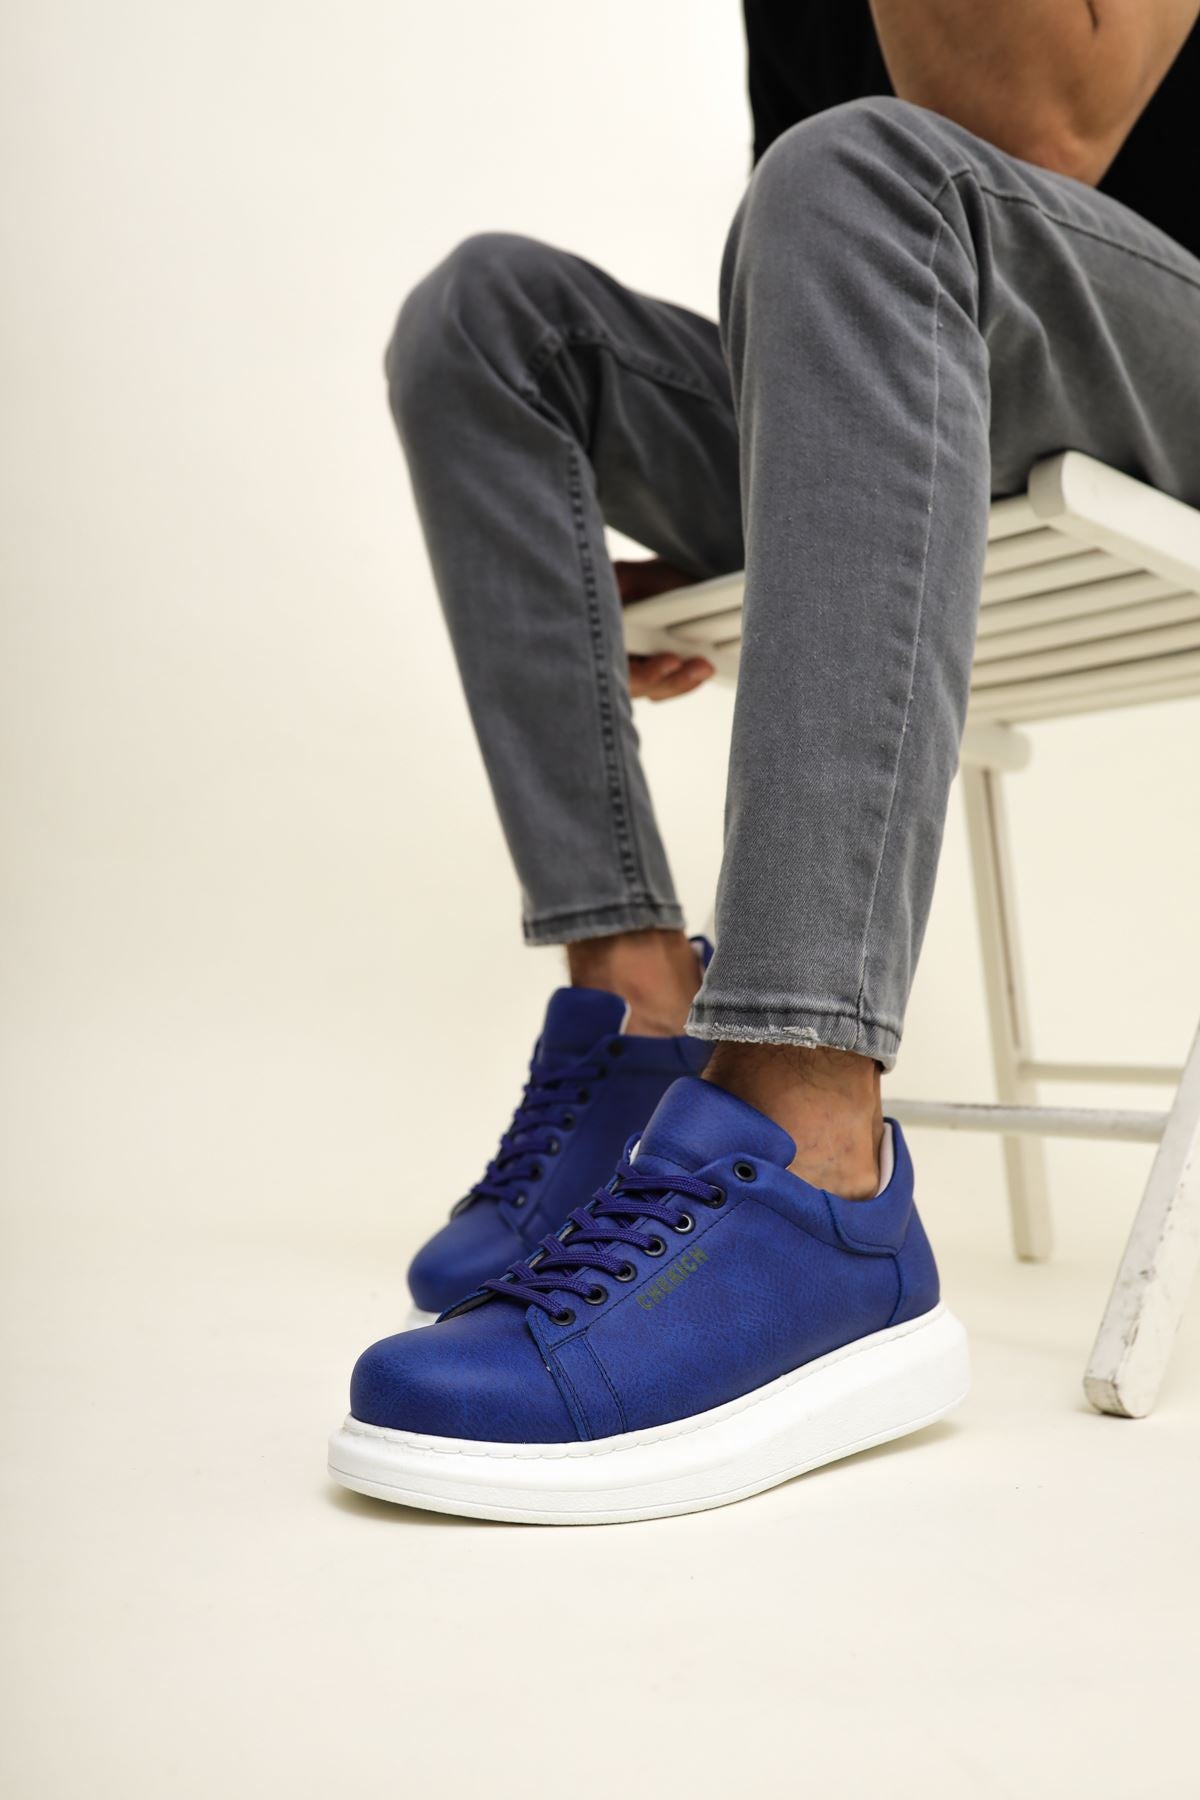 CH257 BT Men's Sneakers  Shoes Sax Blue - STREETMODE ™